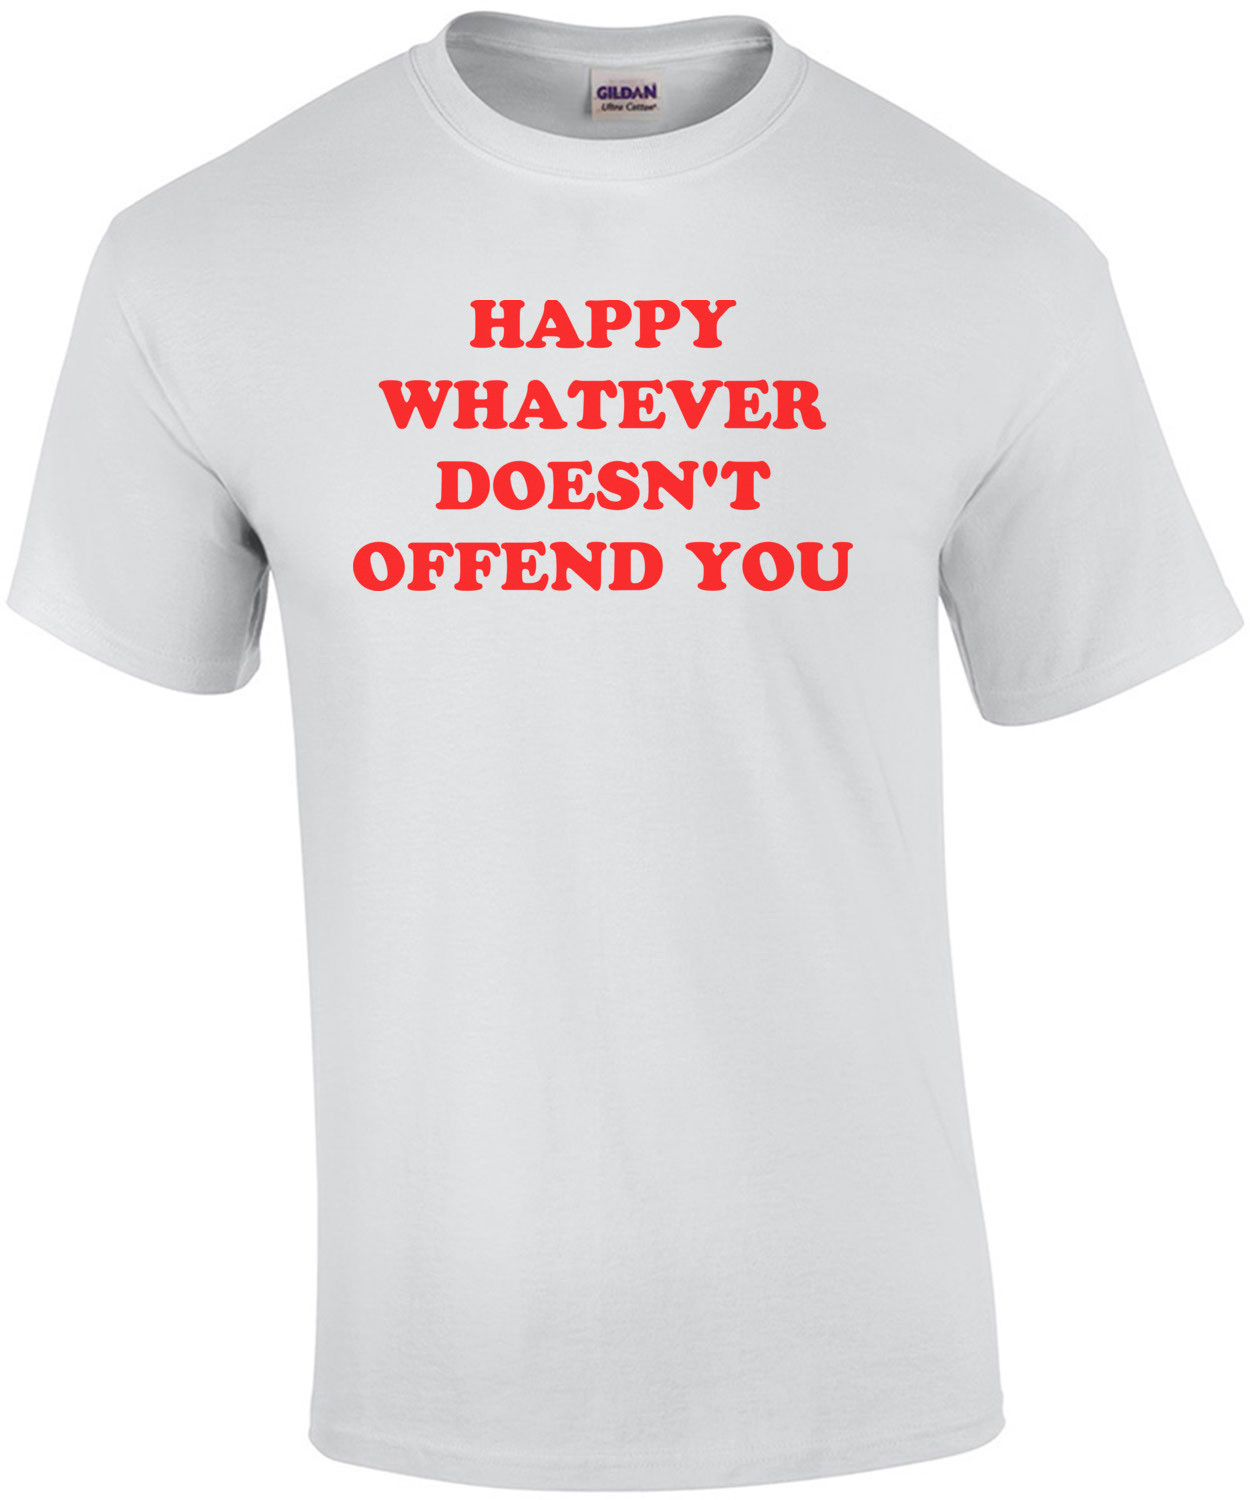 HAPPY WHATEVER DOESN'T OFFEND YOU Shirt